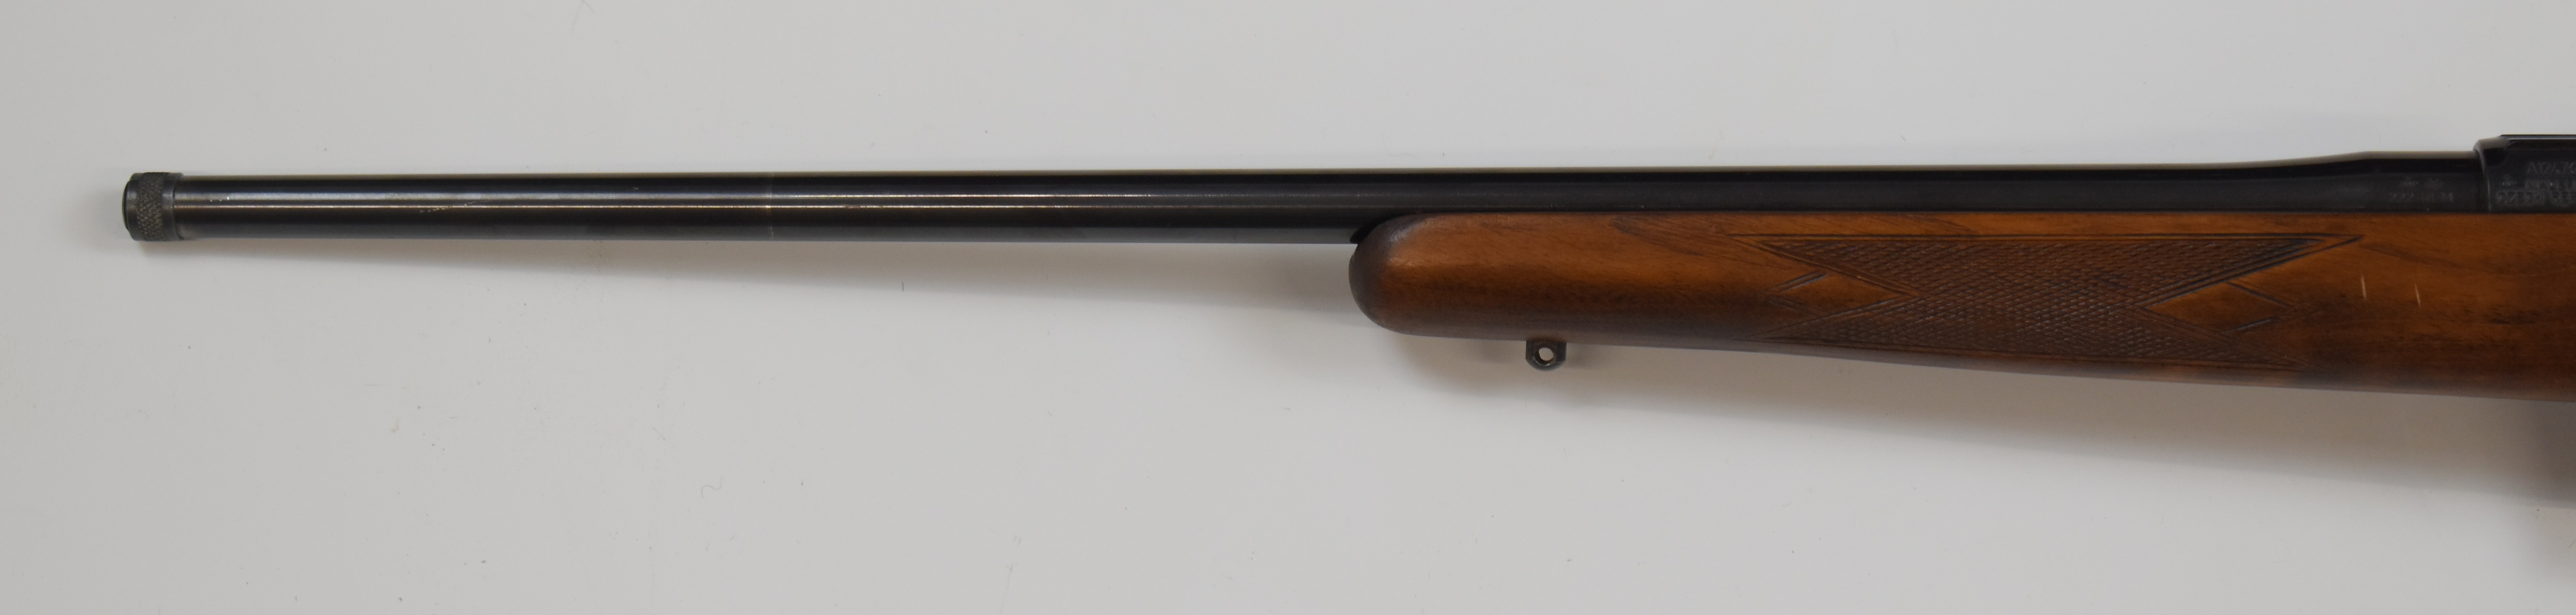 CZ 527 American .222 Remington bolt-action rifle with chequered semi-pistol grip and forend, sling - Image 9 of 10